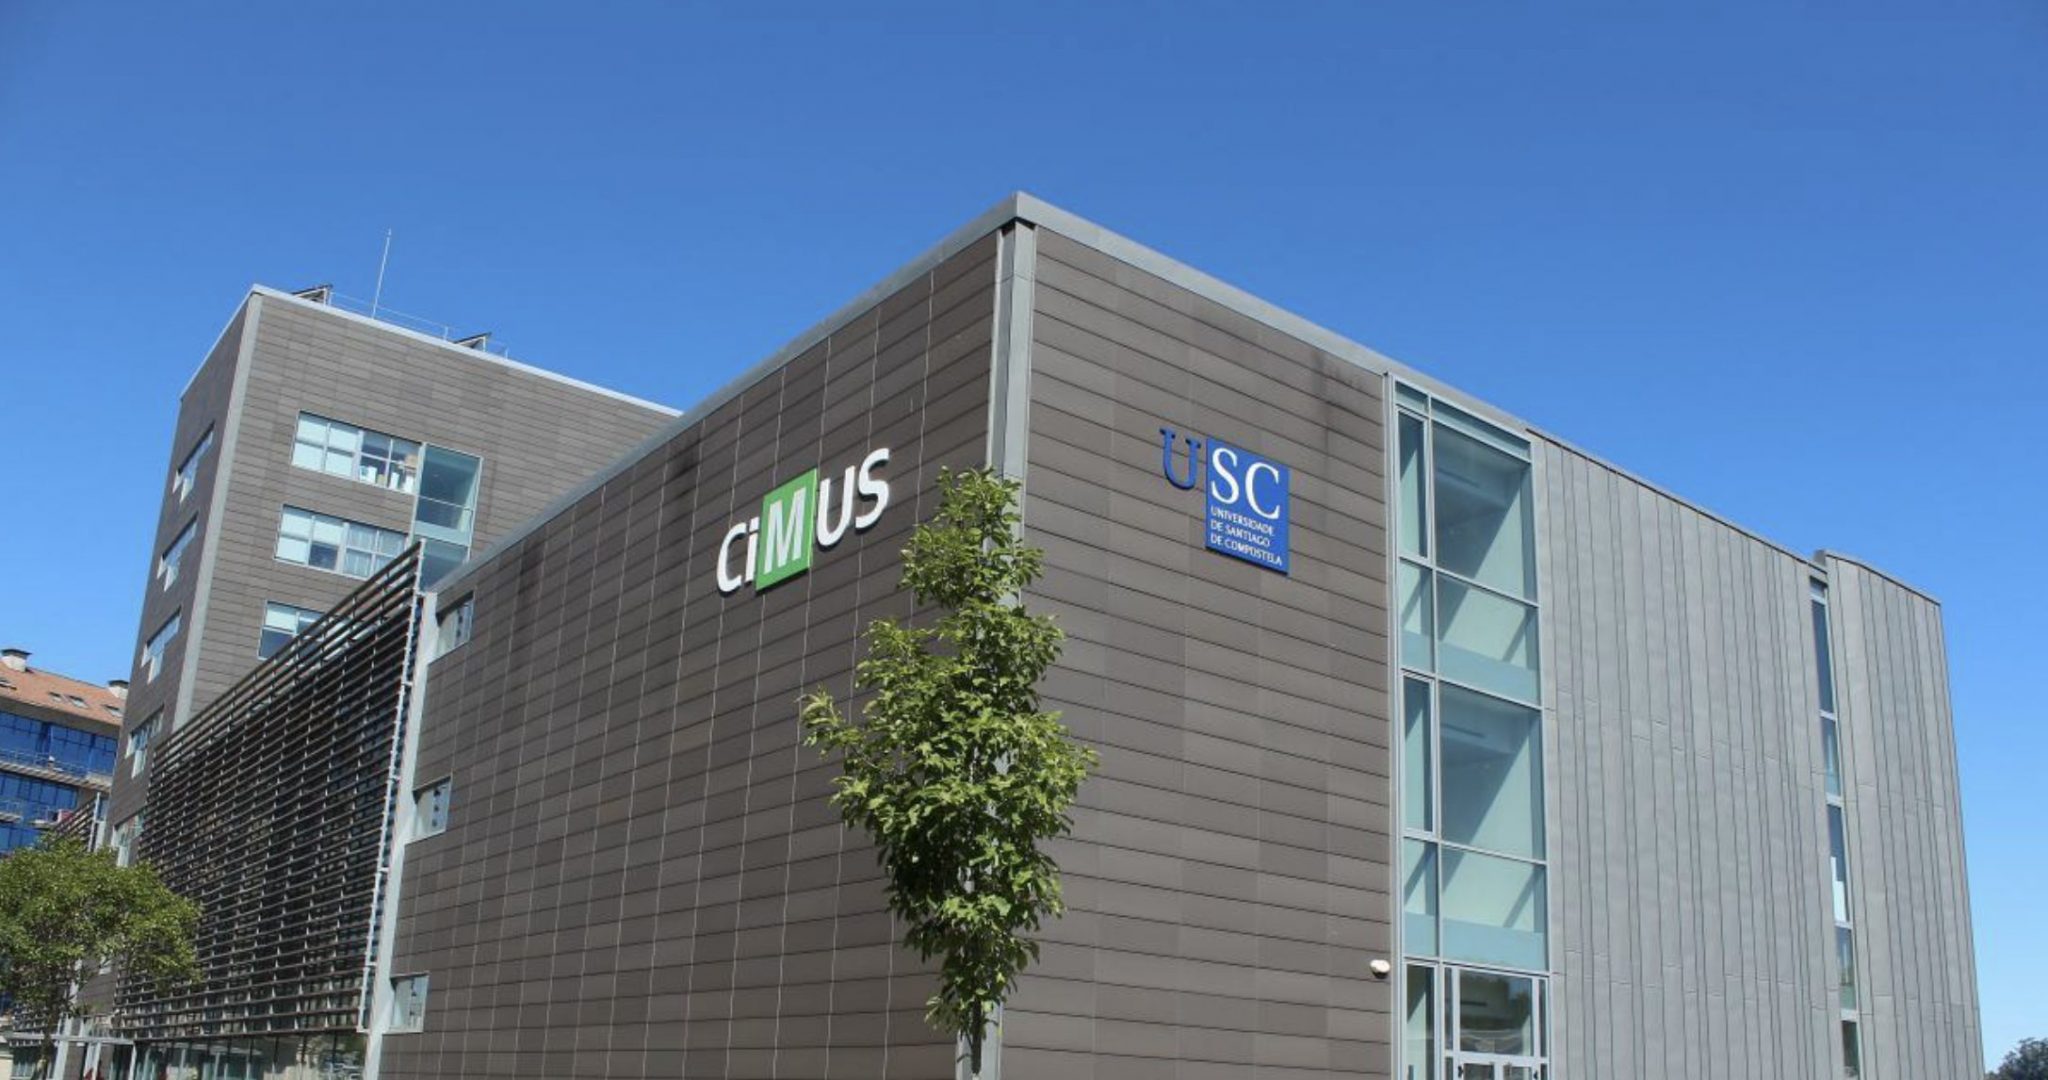 PhD position in Biomedicine at CIMUS – USC, Spain